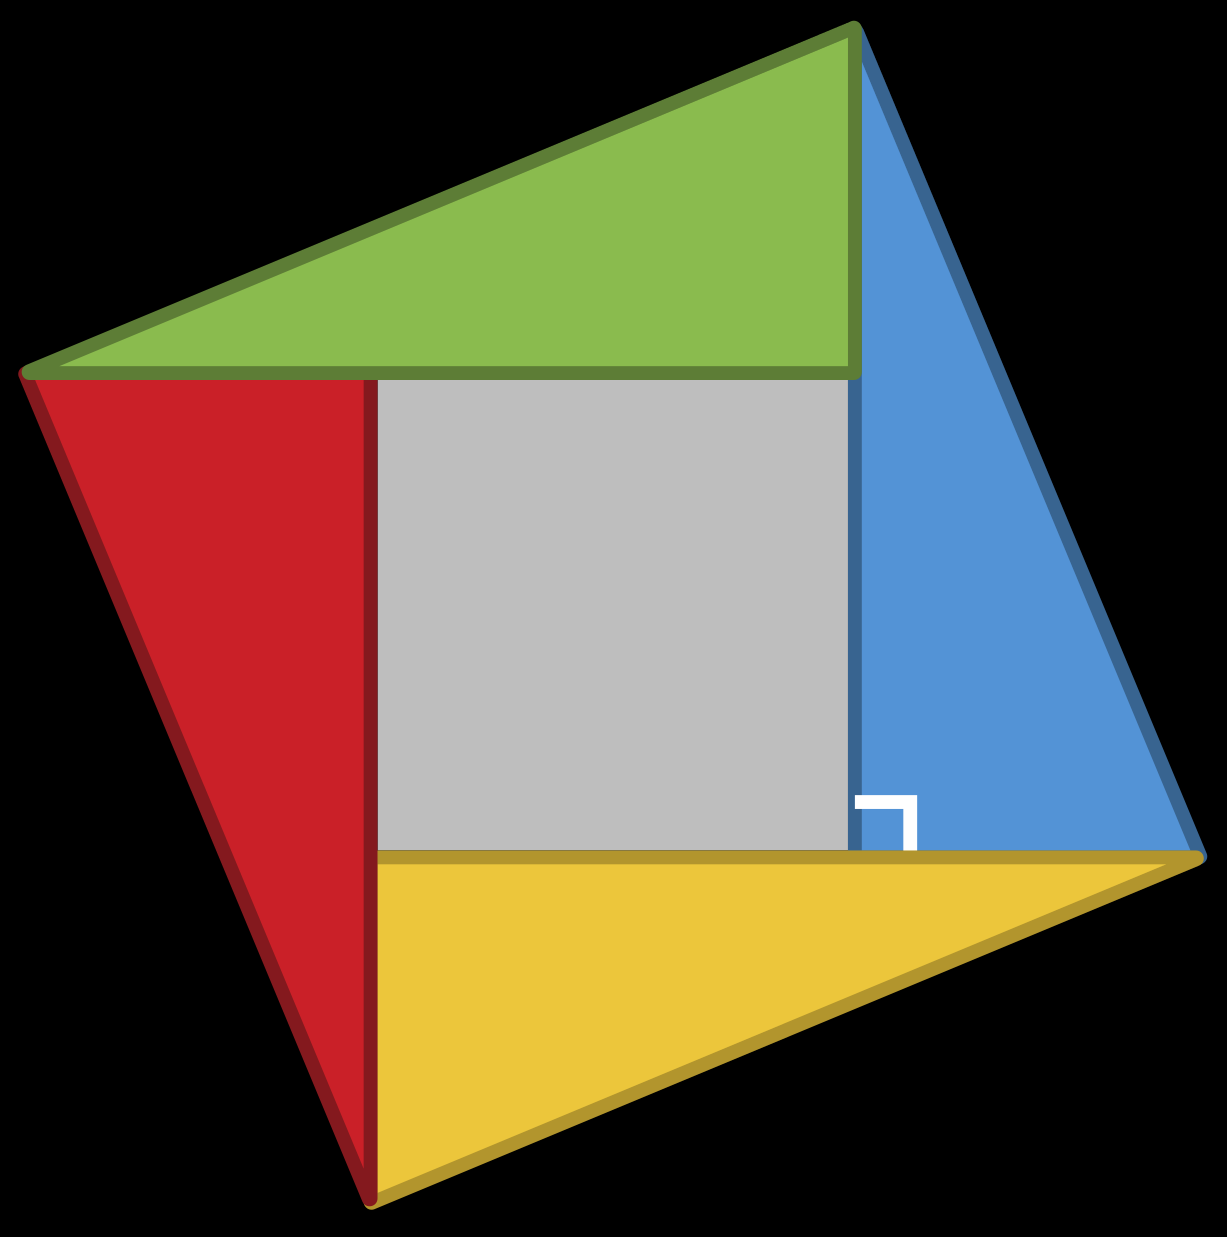 tilted square divided into four equal triangles surrounding a central smaller square